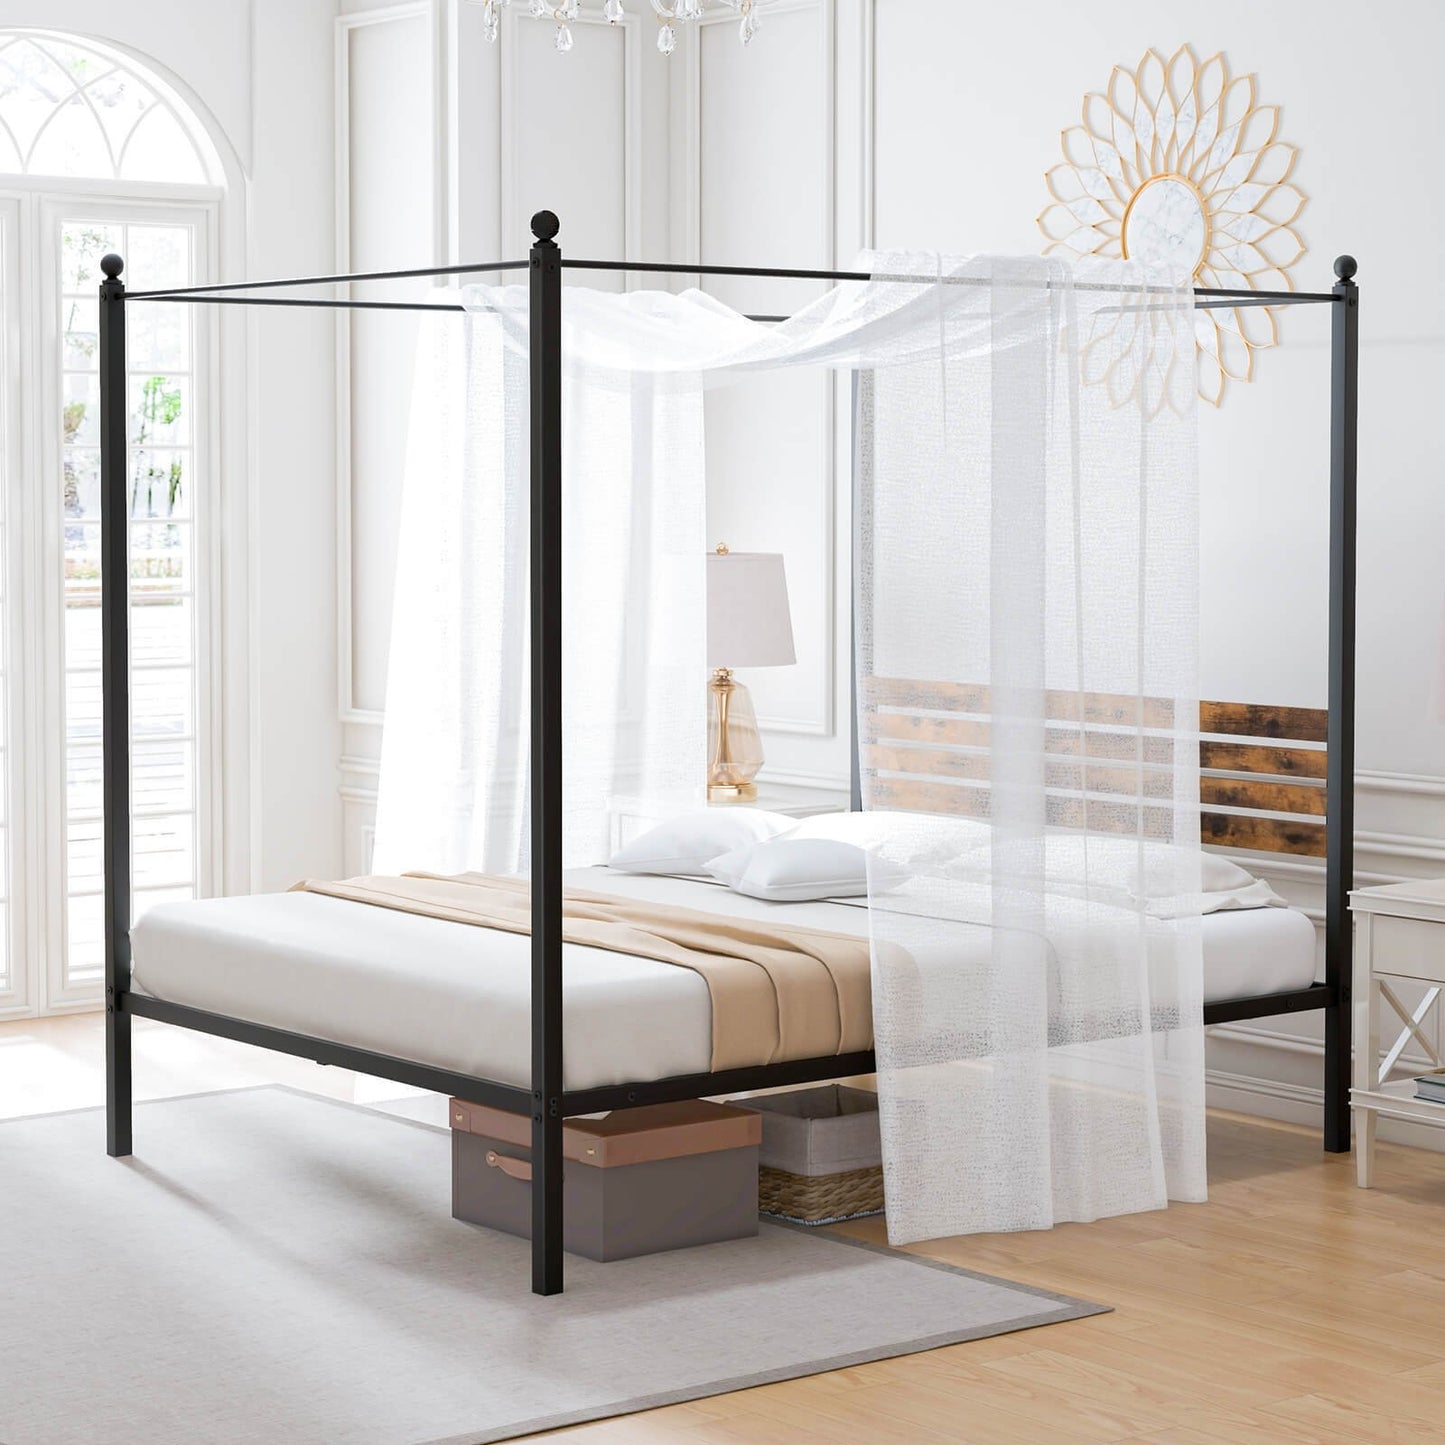 Queen Size Canopy Bed Frame with Under Bed Storage-Queen Size